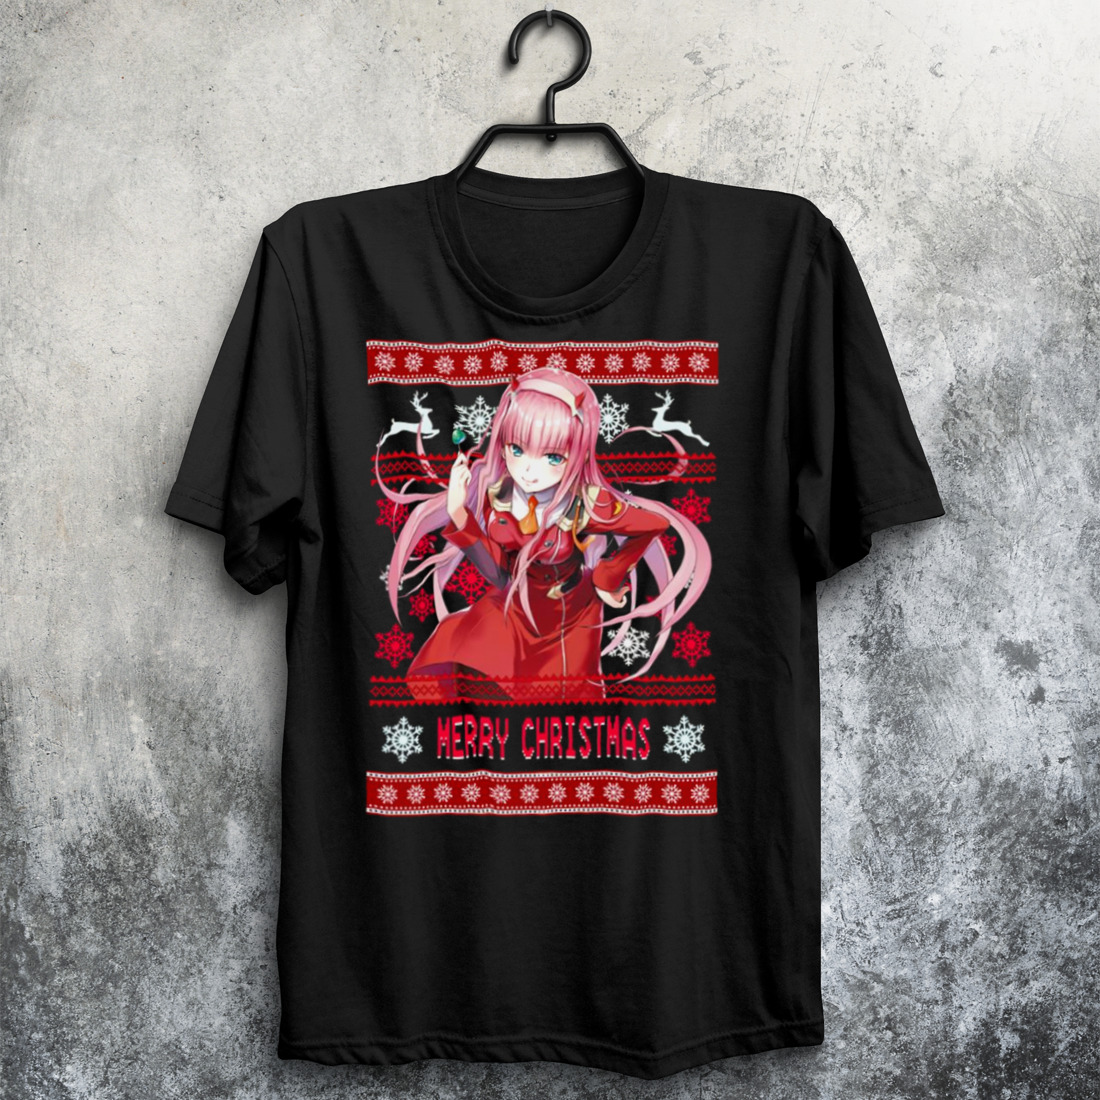 Zero Two Derling In The Franxx Anime Ugly Christmas Pattern shirt